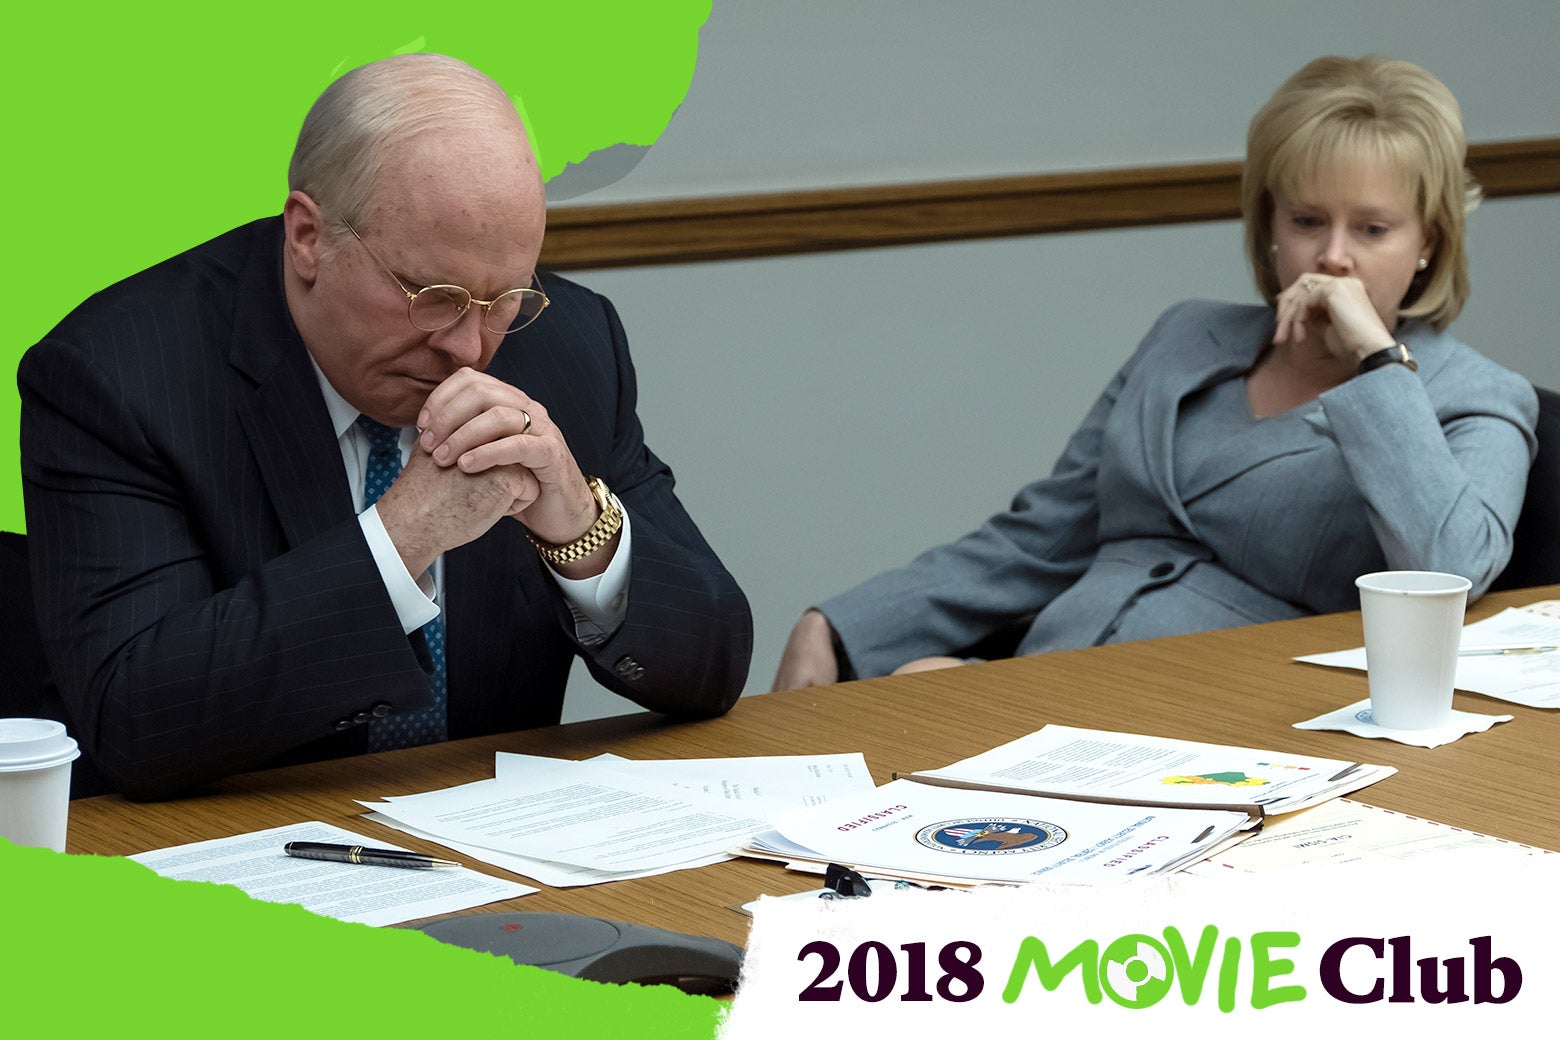 Christian Bale stars as Dick Cheney and Amy Adams stars as Lynne Cheney in Adam McKay’s Vice.